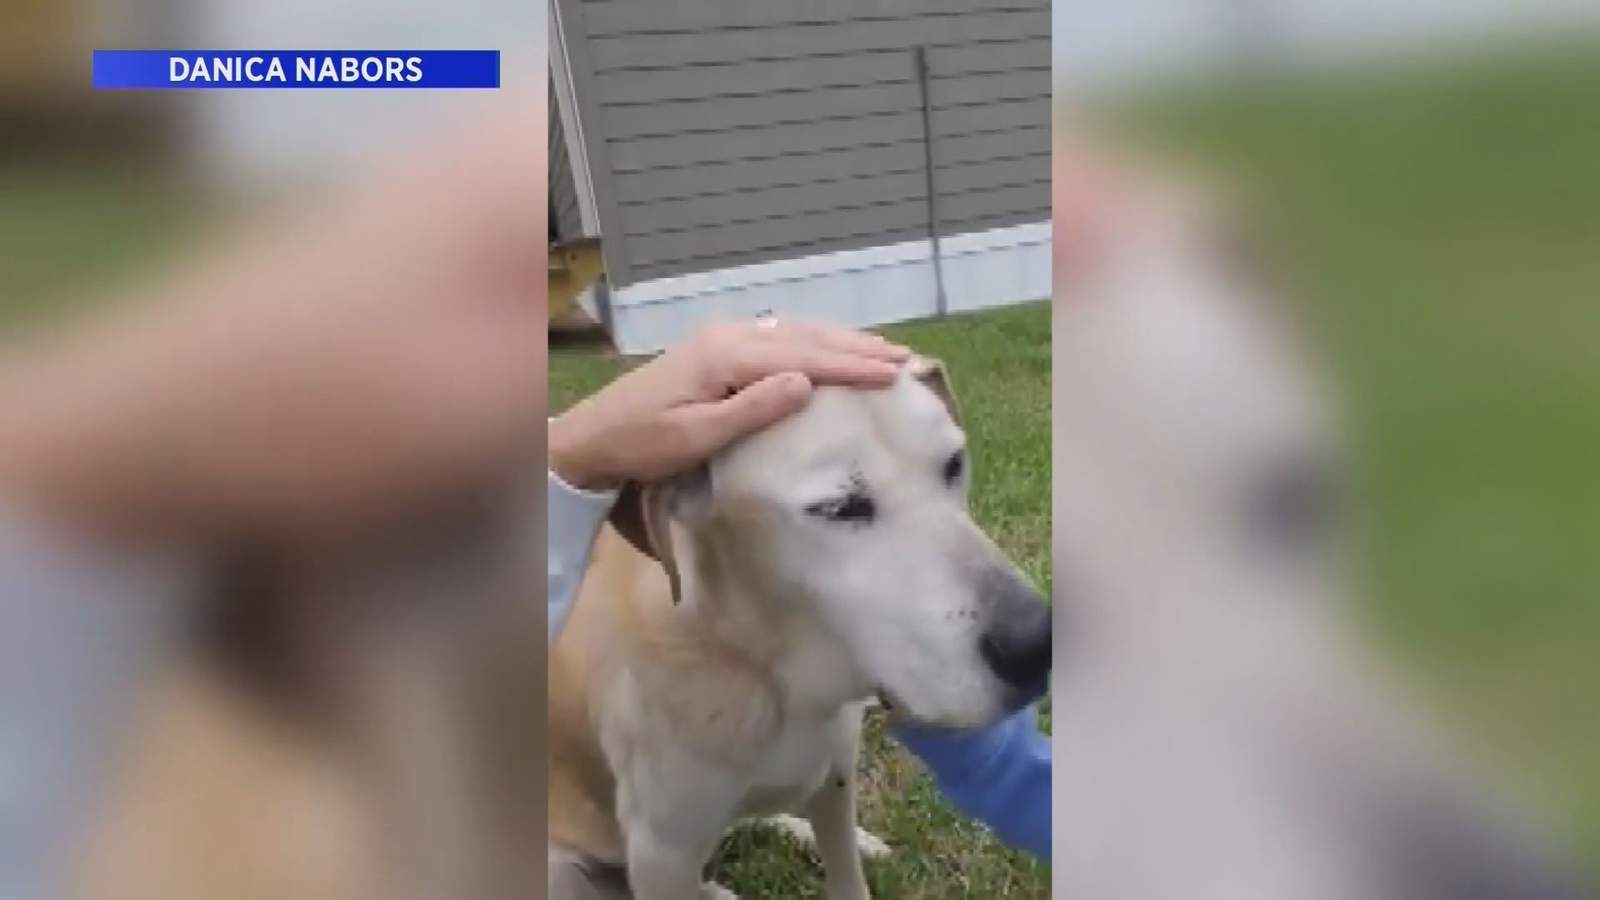 Montgomery family reunites dog with owner after nearly 2 weeks using social media